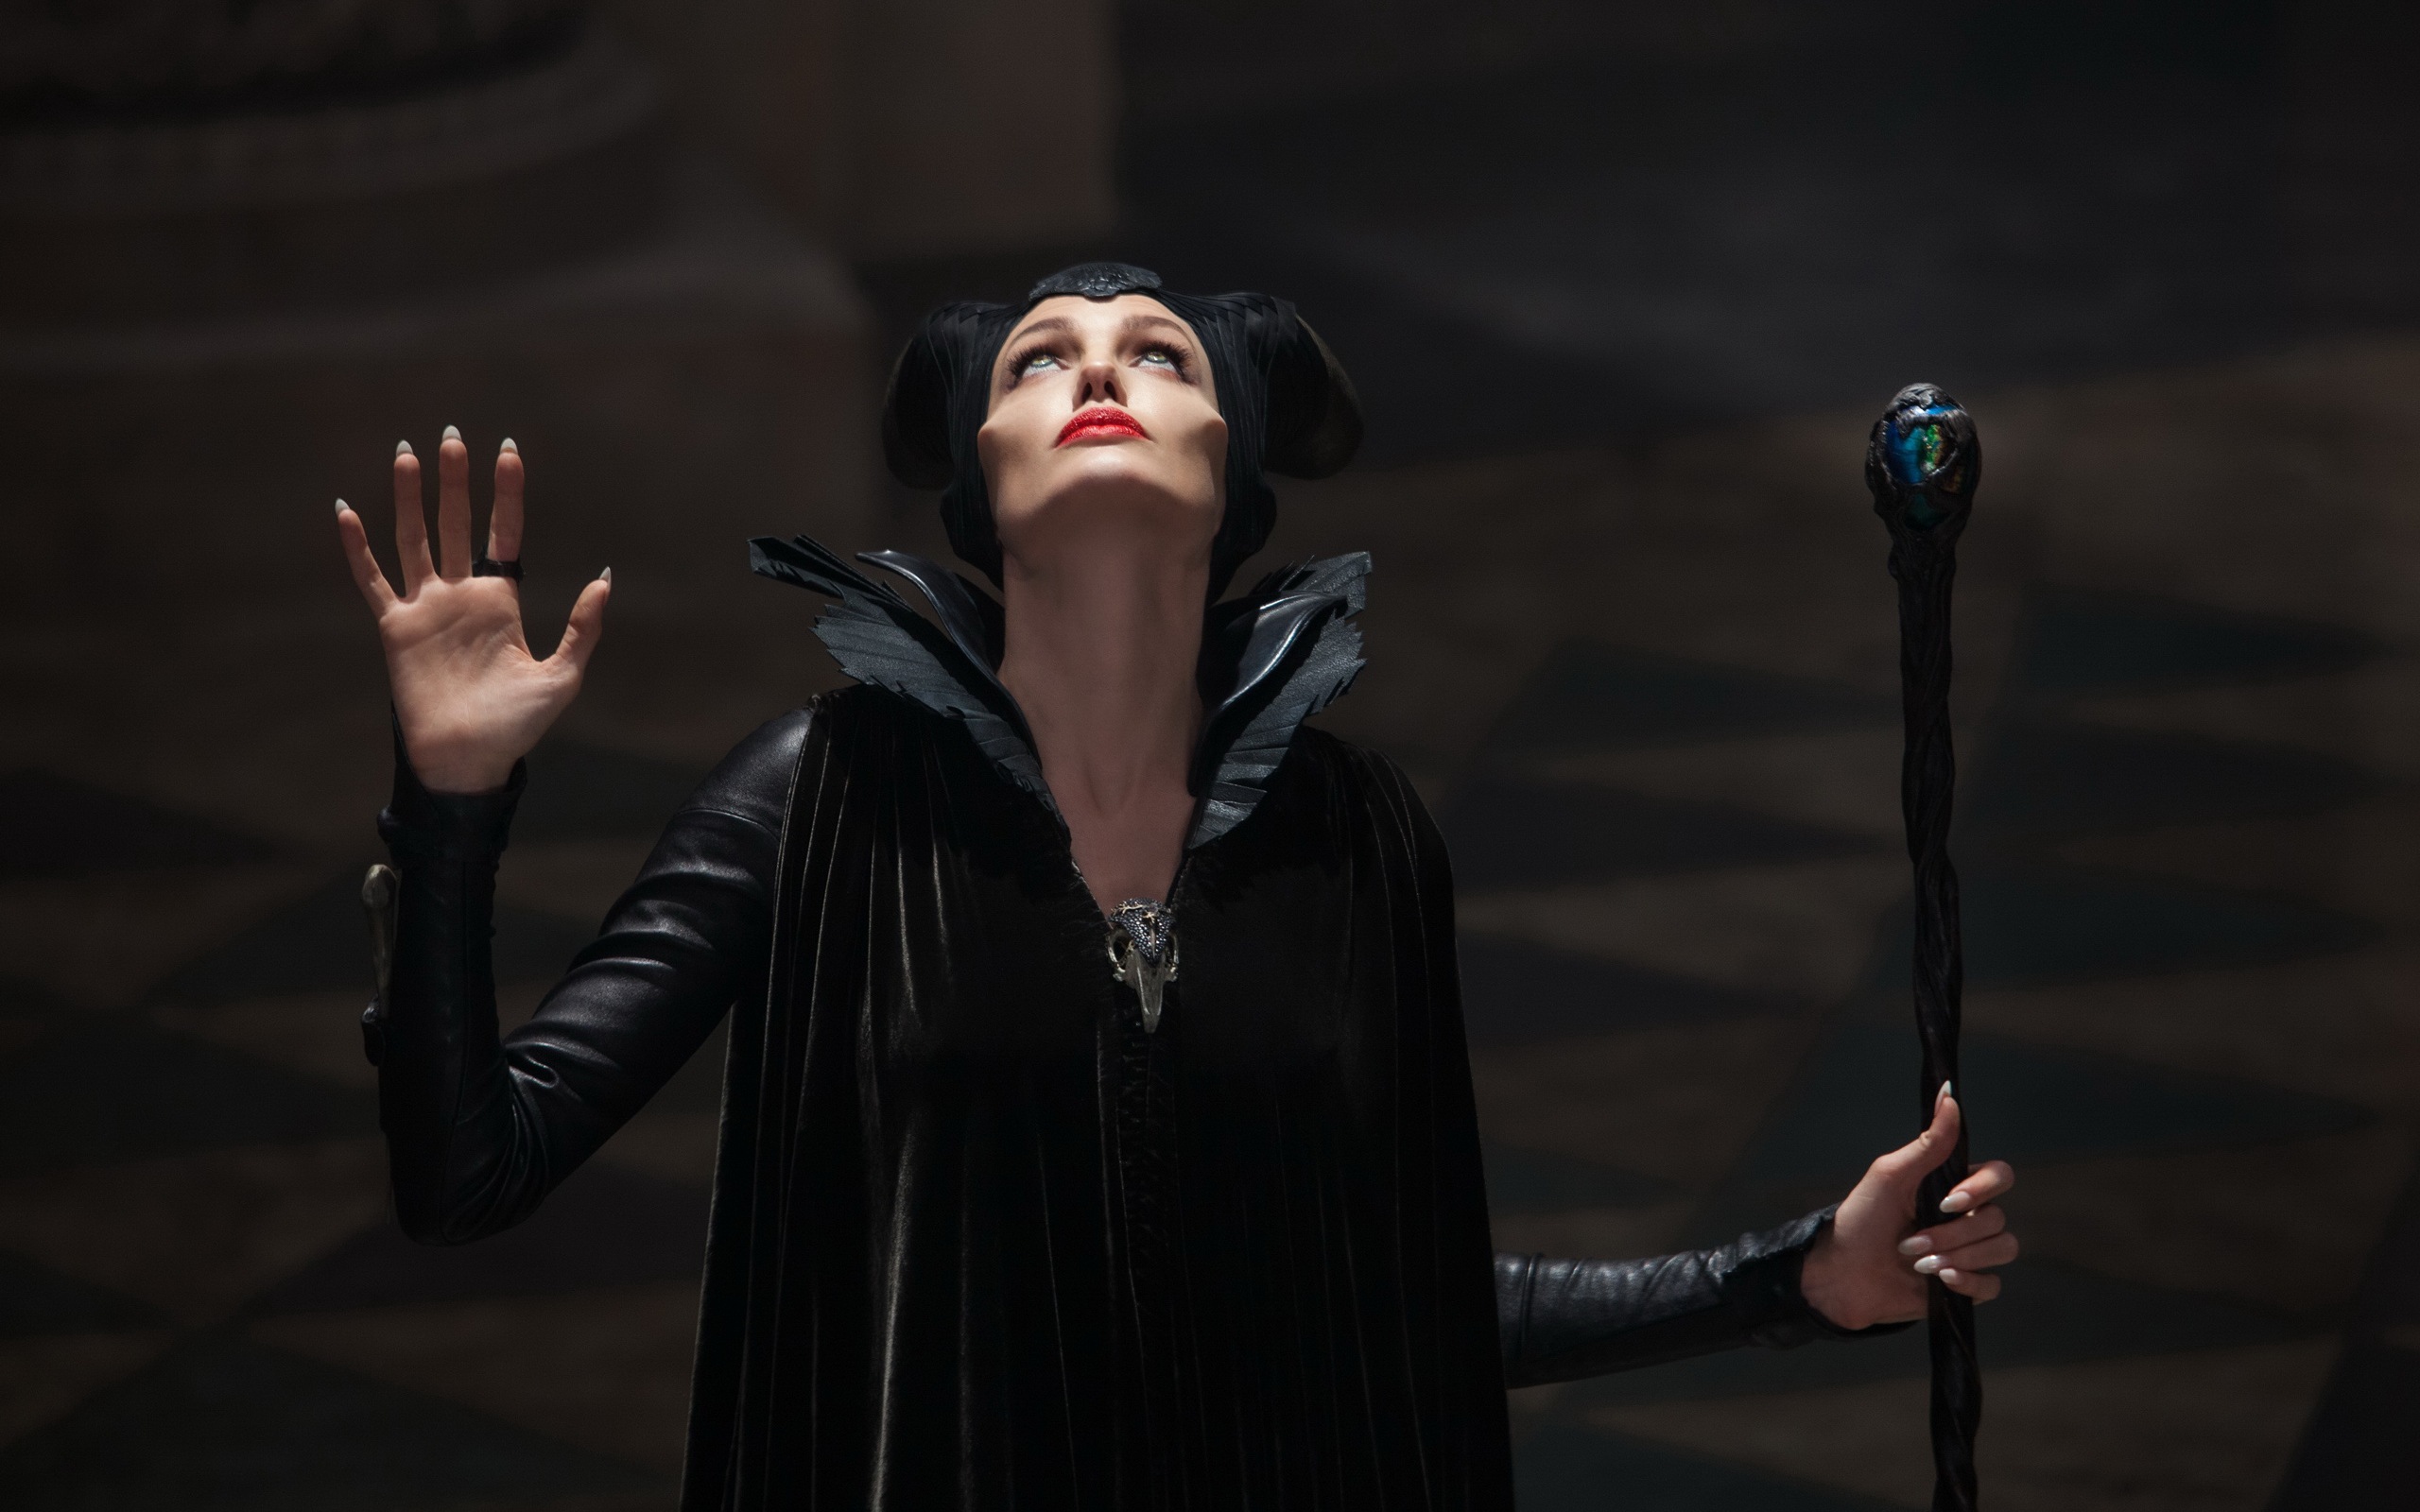 Maleficent 2014 HD movie wallpapers #4 - 2560x1600